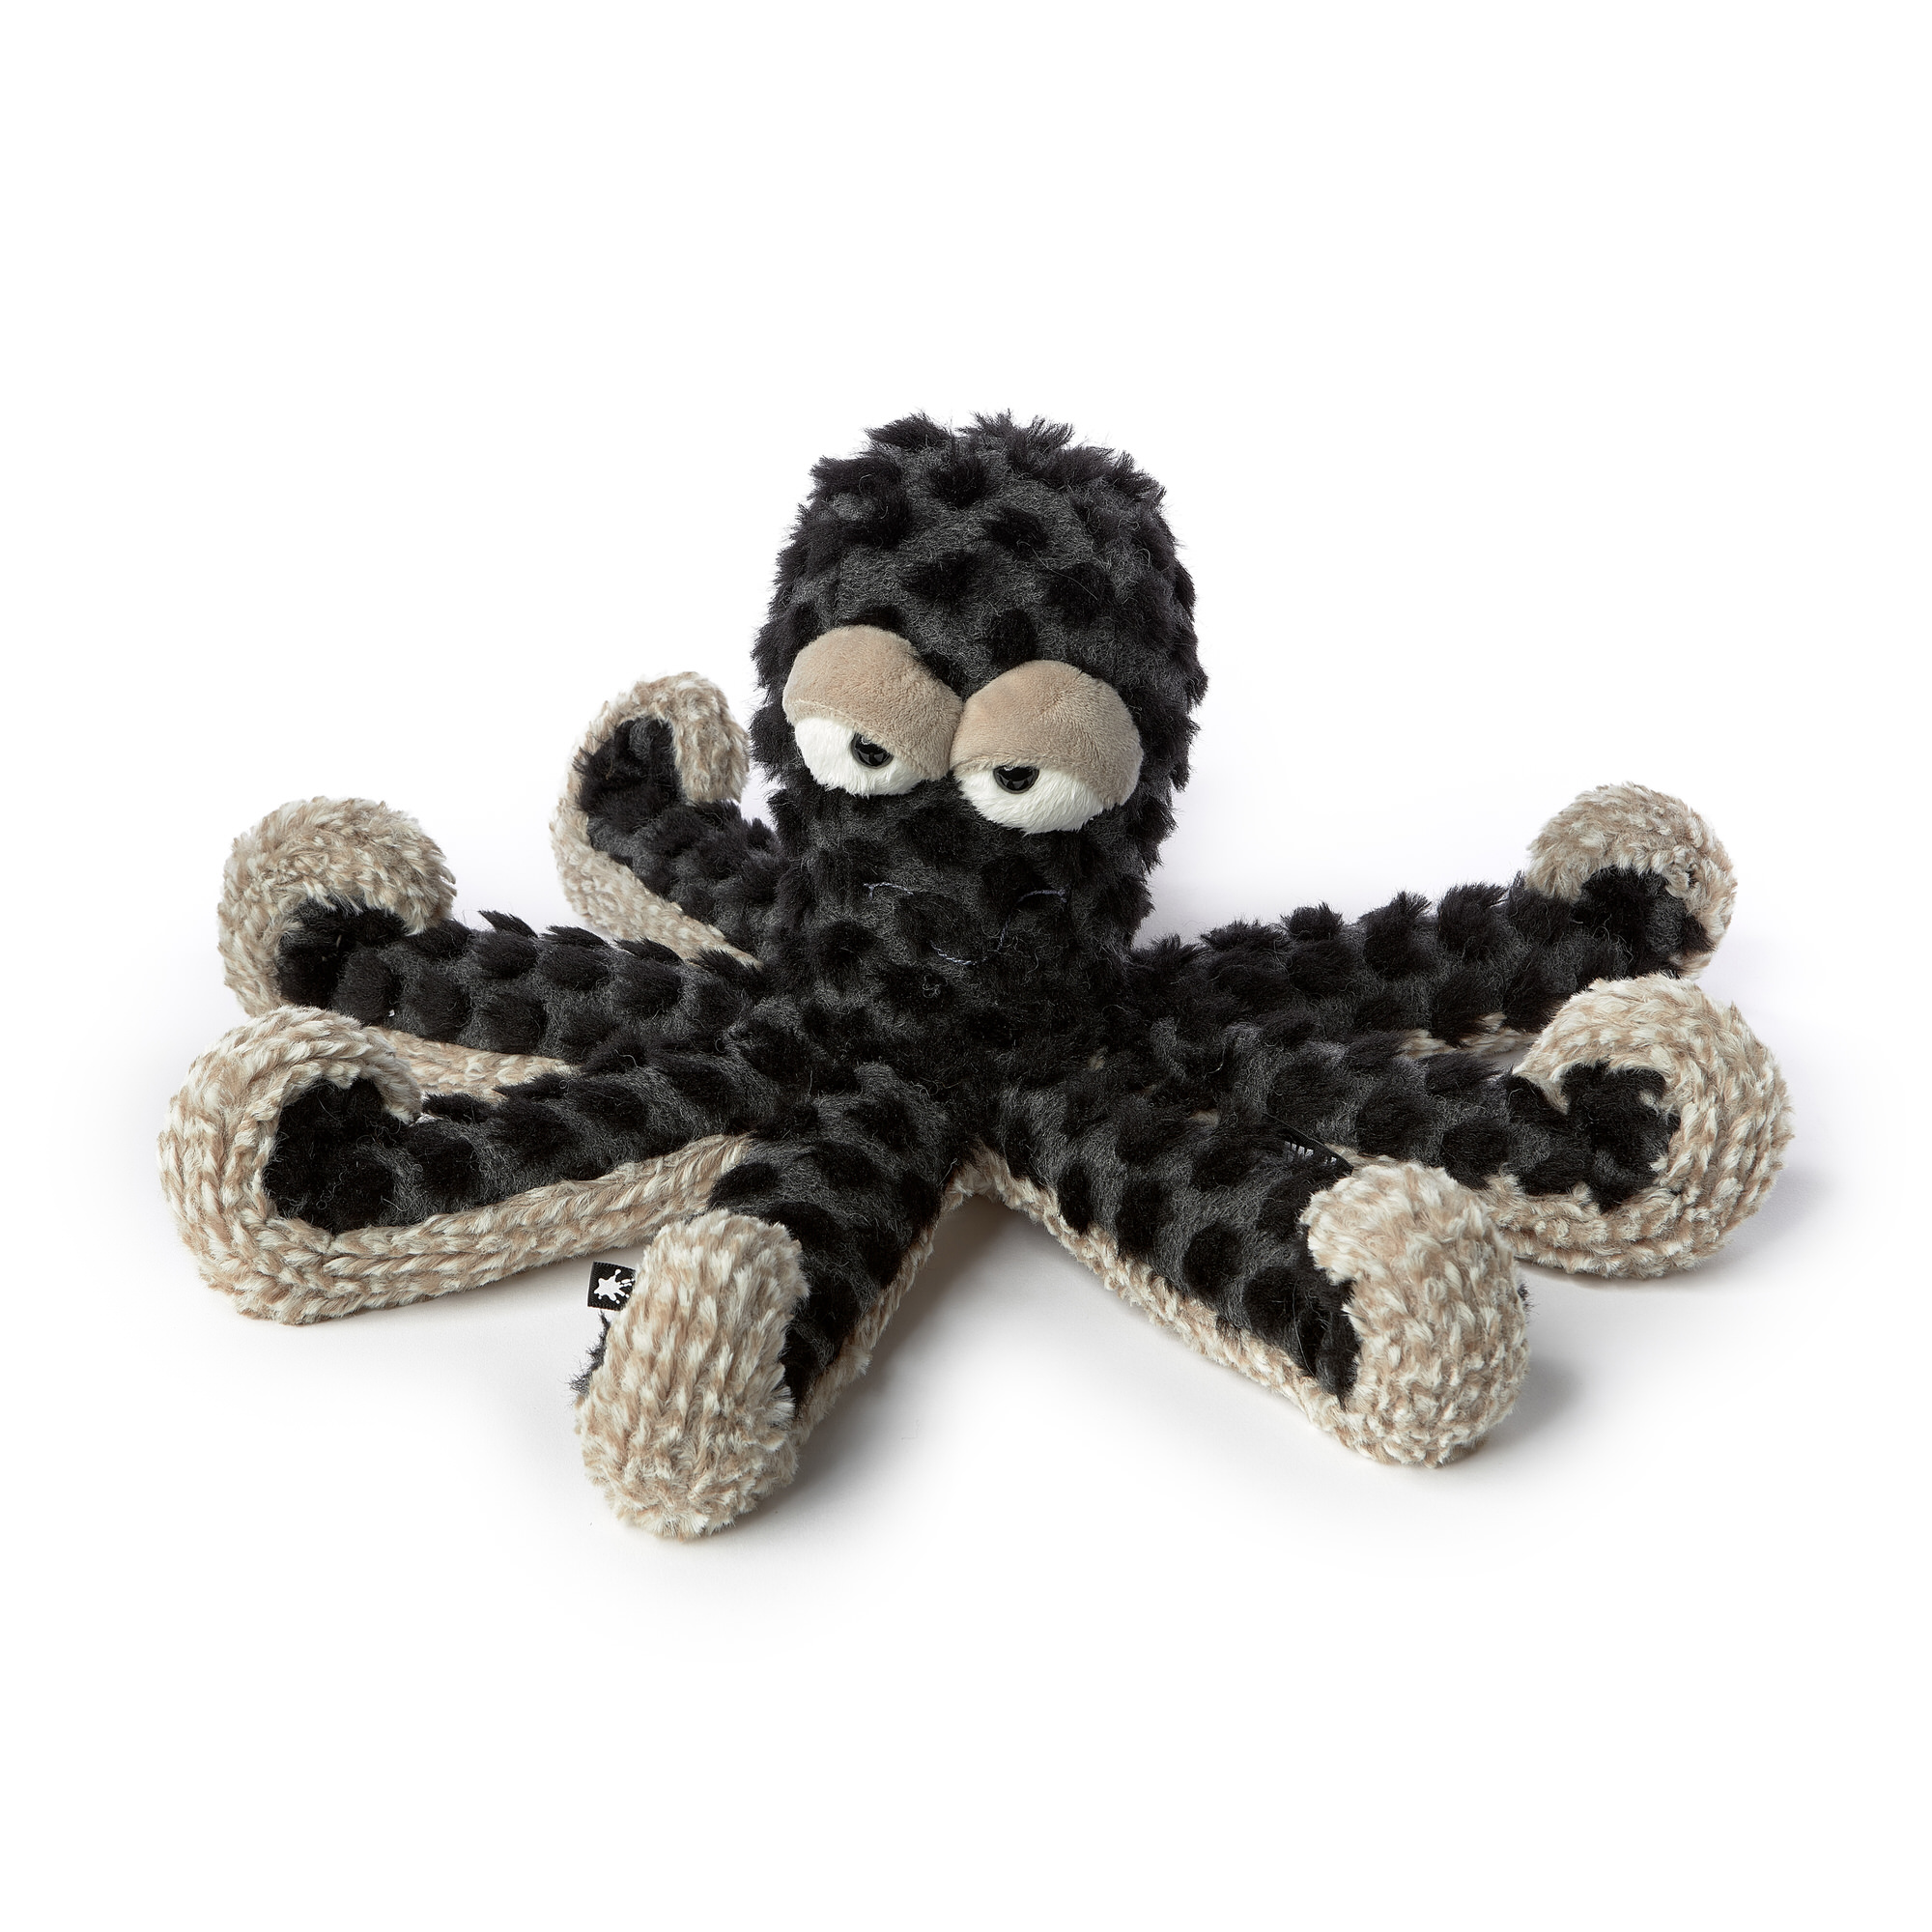 Plush toy octopus Deep Water Dandy, Beasts collection